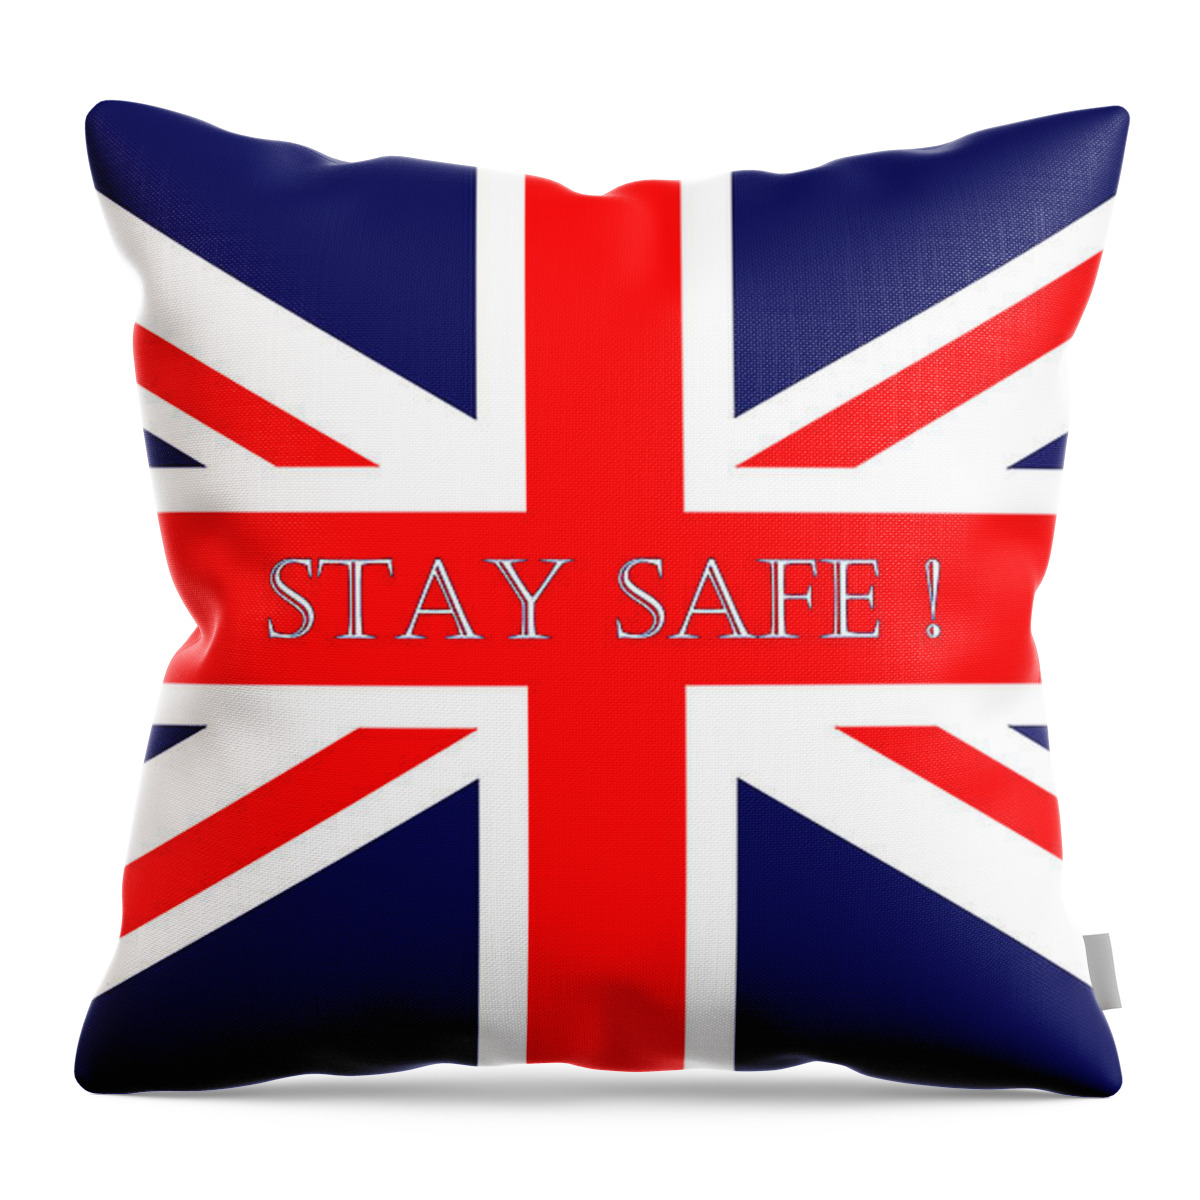 Stay Safe Throw Pillow featuring the digital art Stay Safe UK by Terri Waters